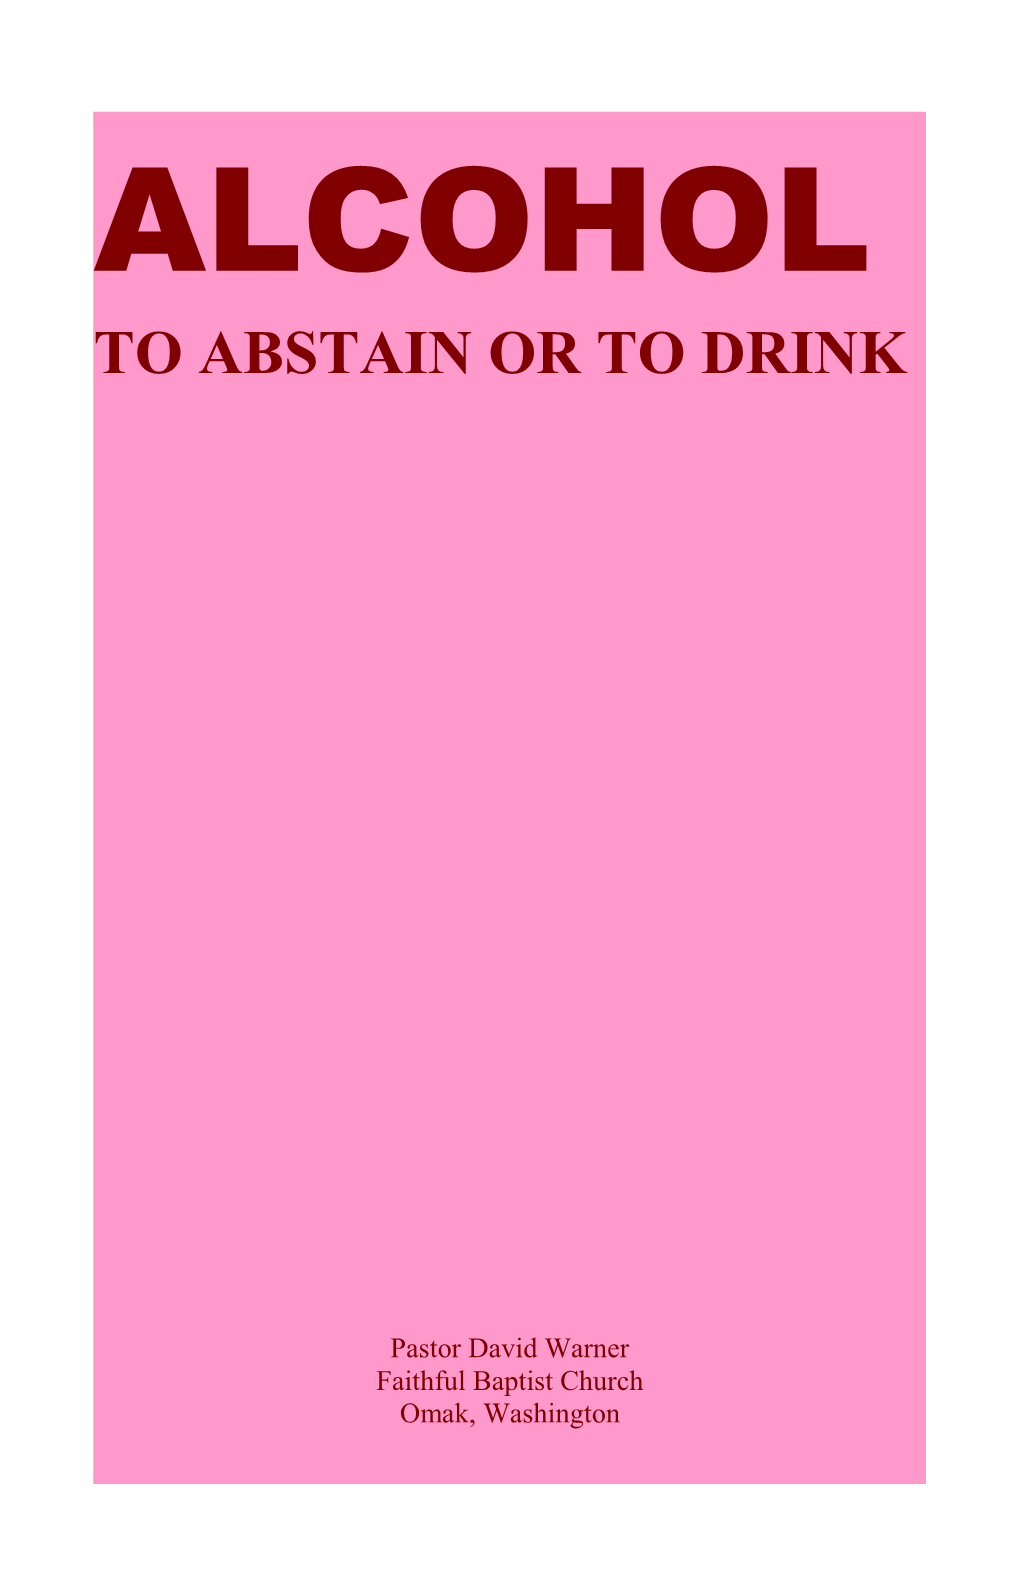 To Abstain Or to Drink